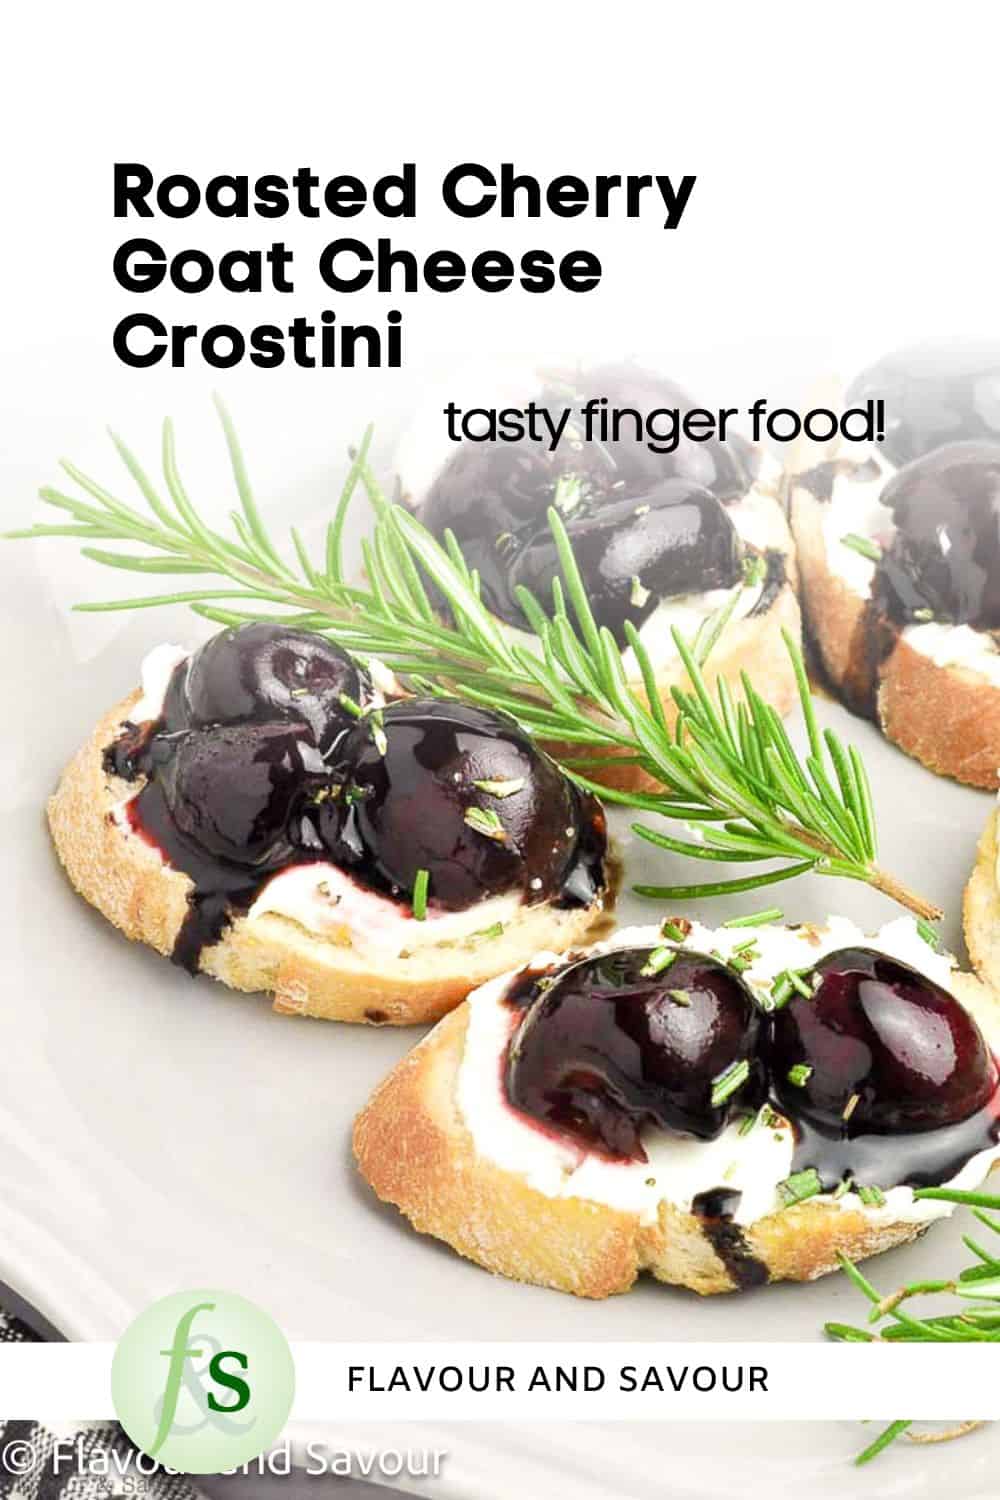 Image with text overlay for roasted cherry goat cheese crostini appetizers.